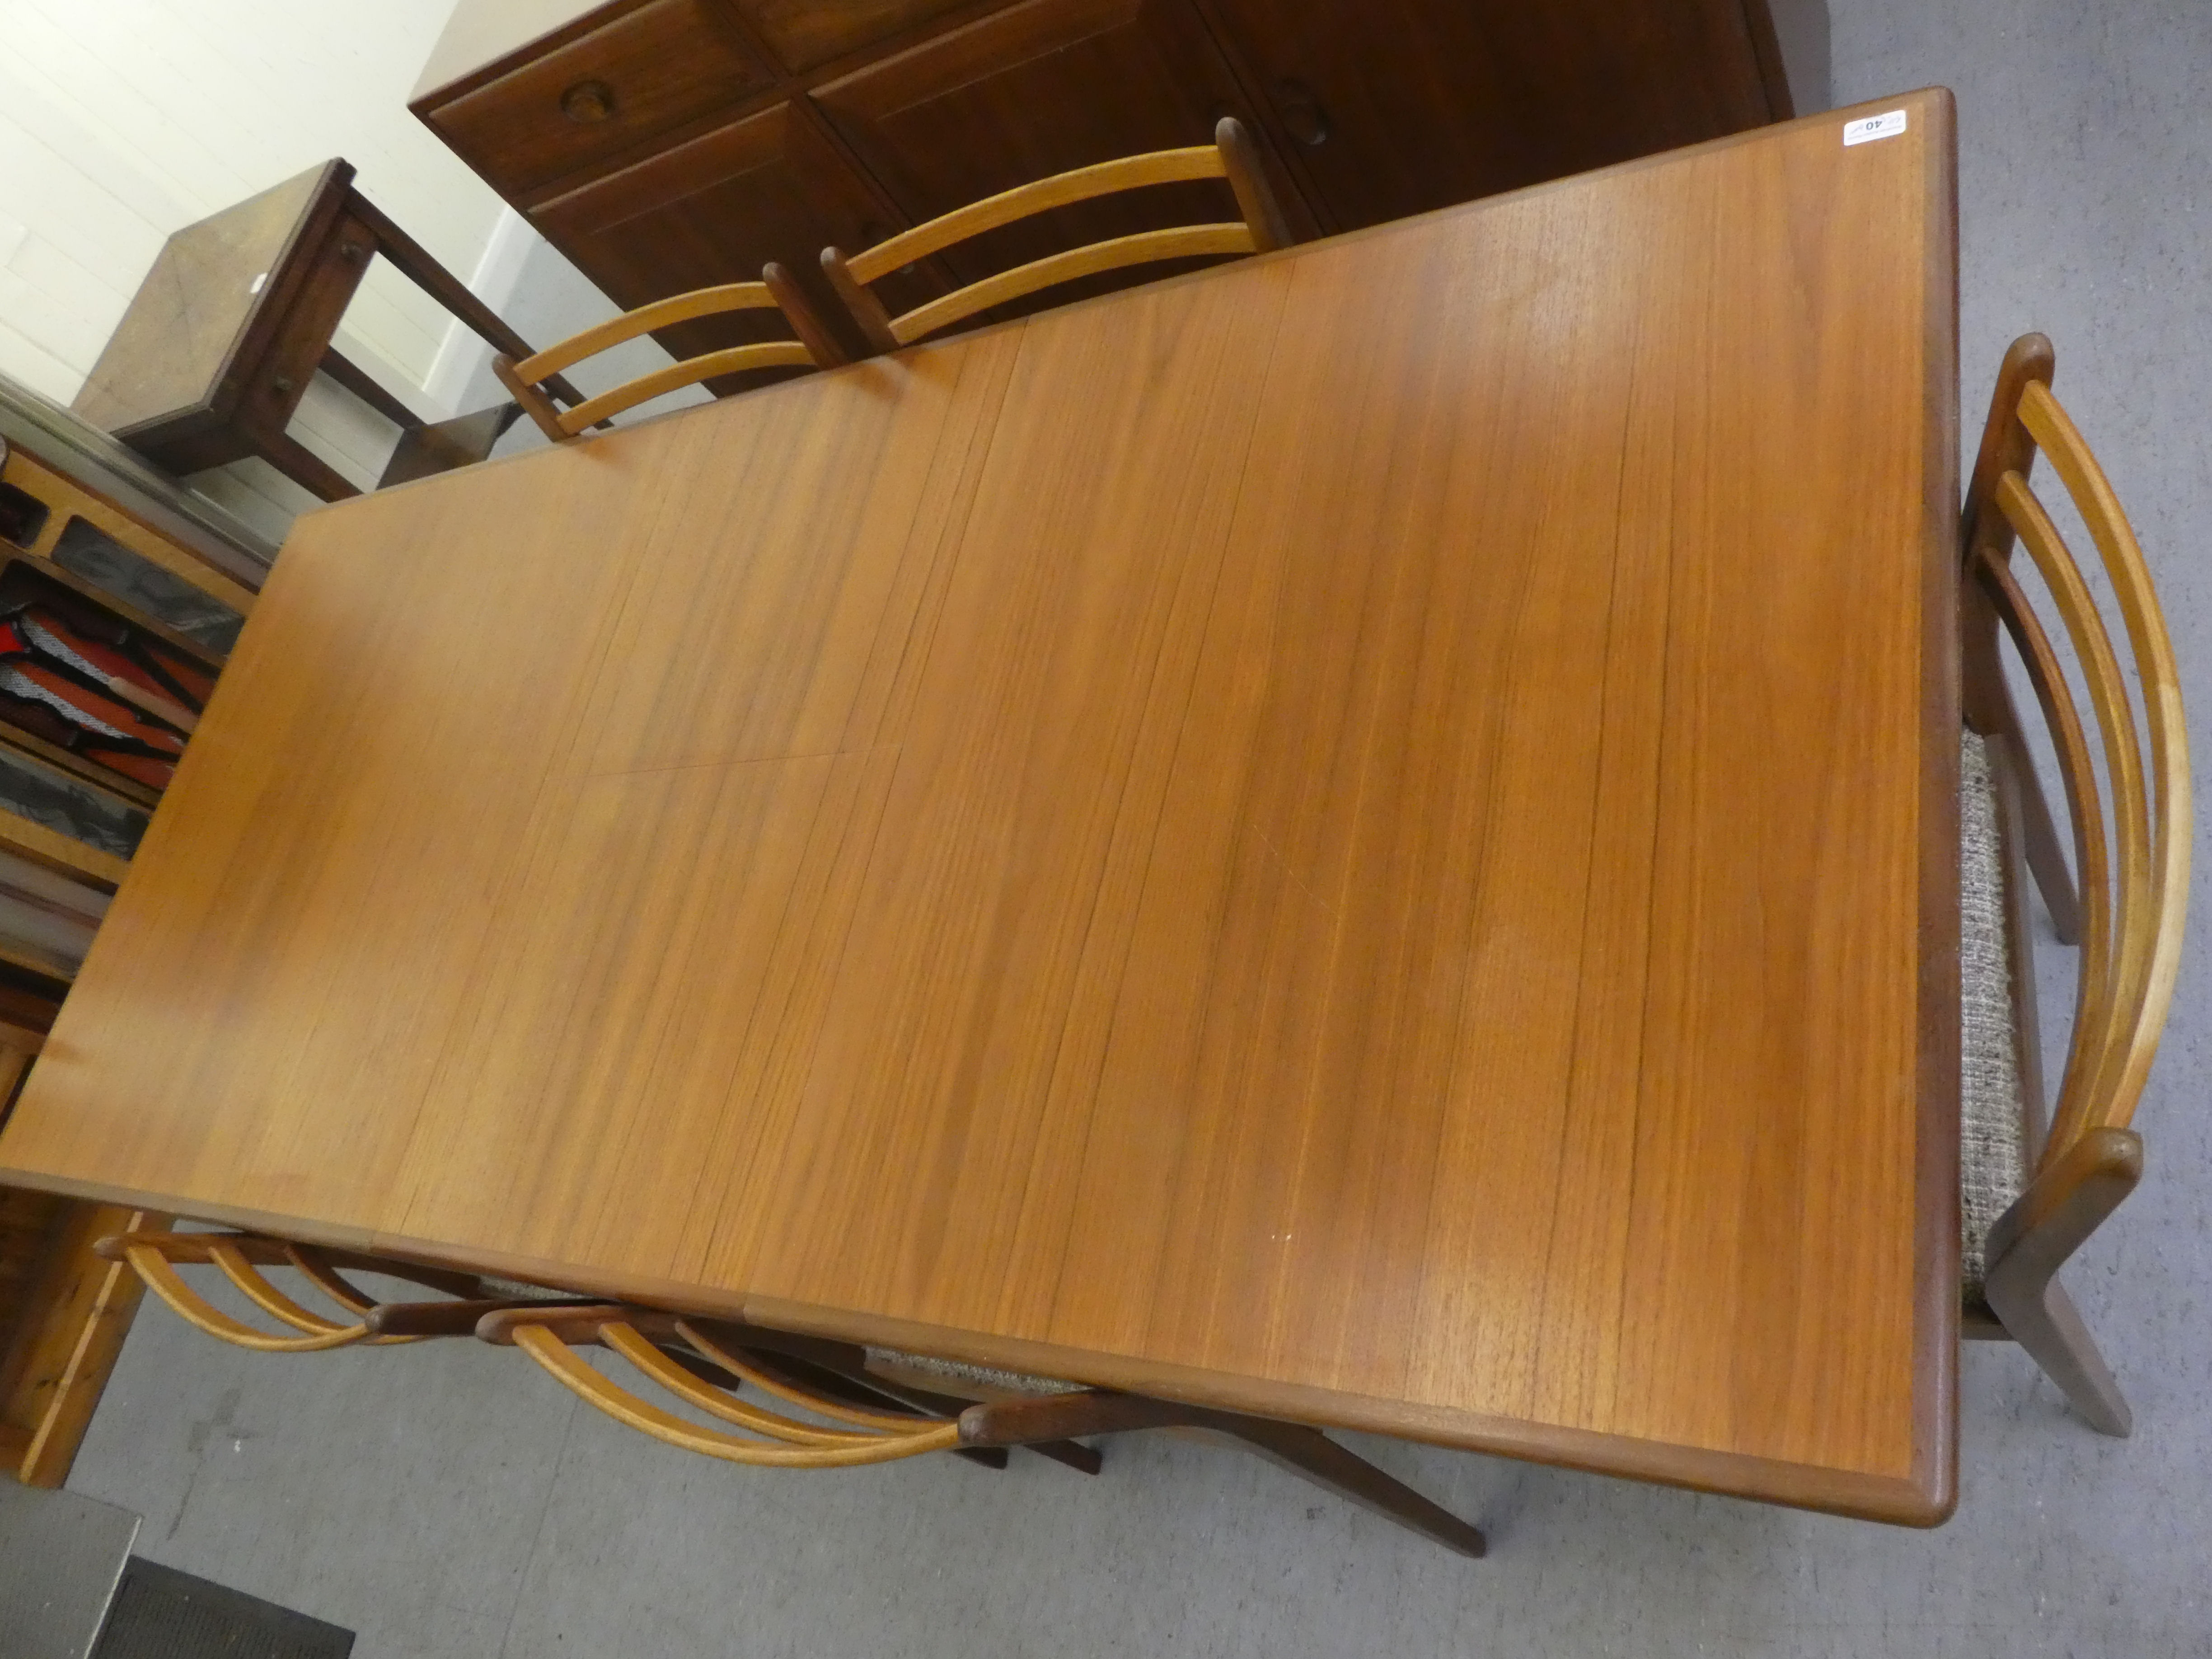 A 1970s teak G-Plan dining table, raised on turned, tapered legs  29"h  62"L extending to 80"L - Image 3 of 8